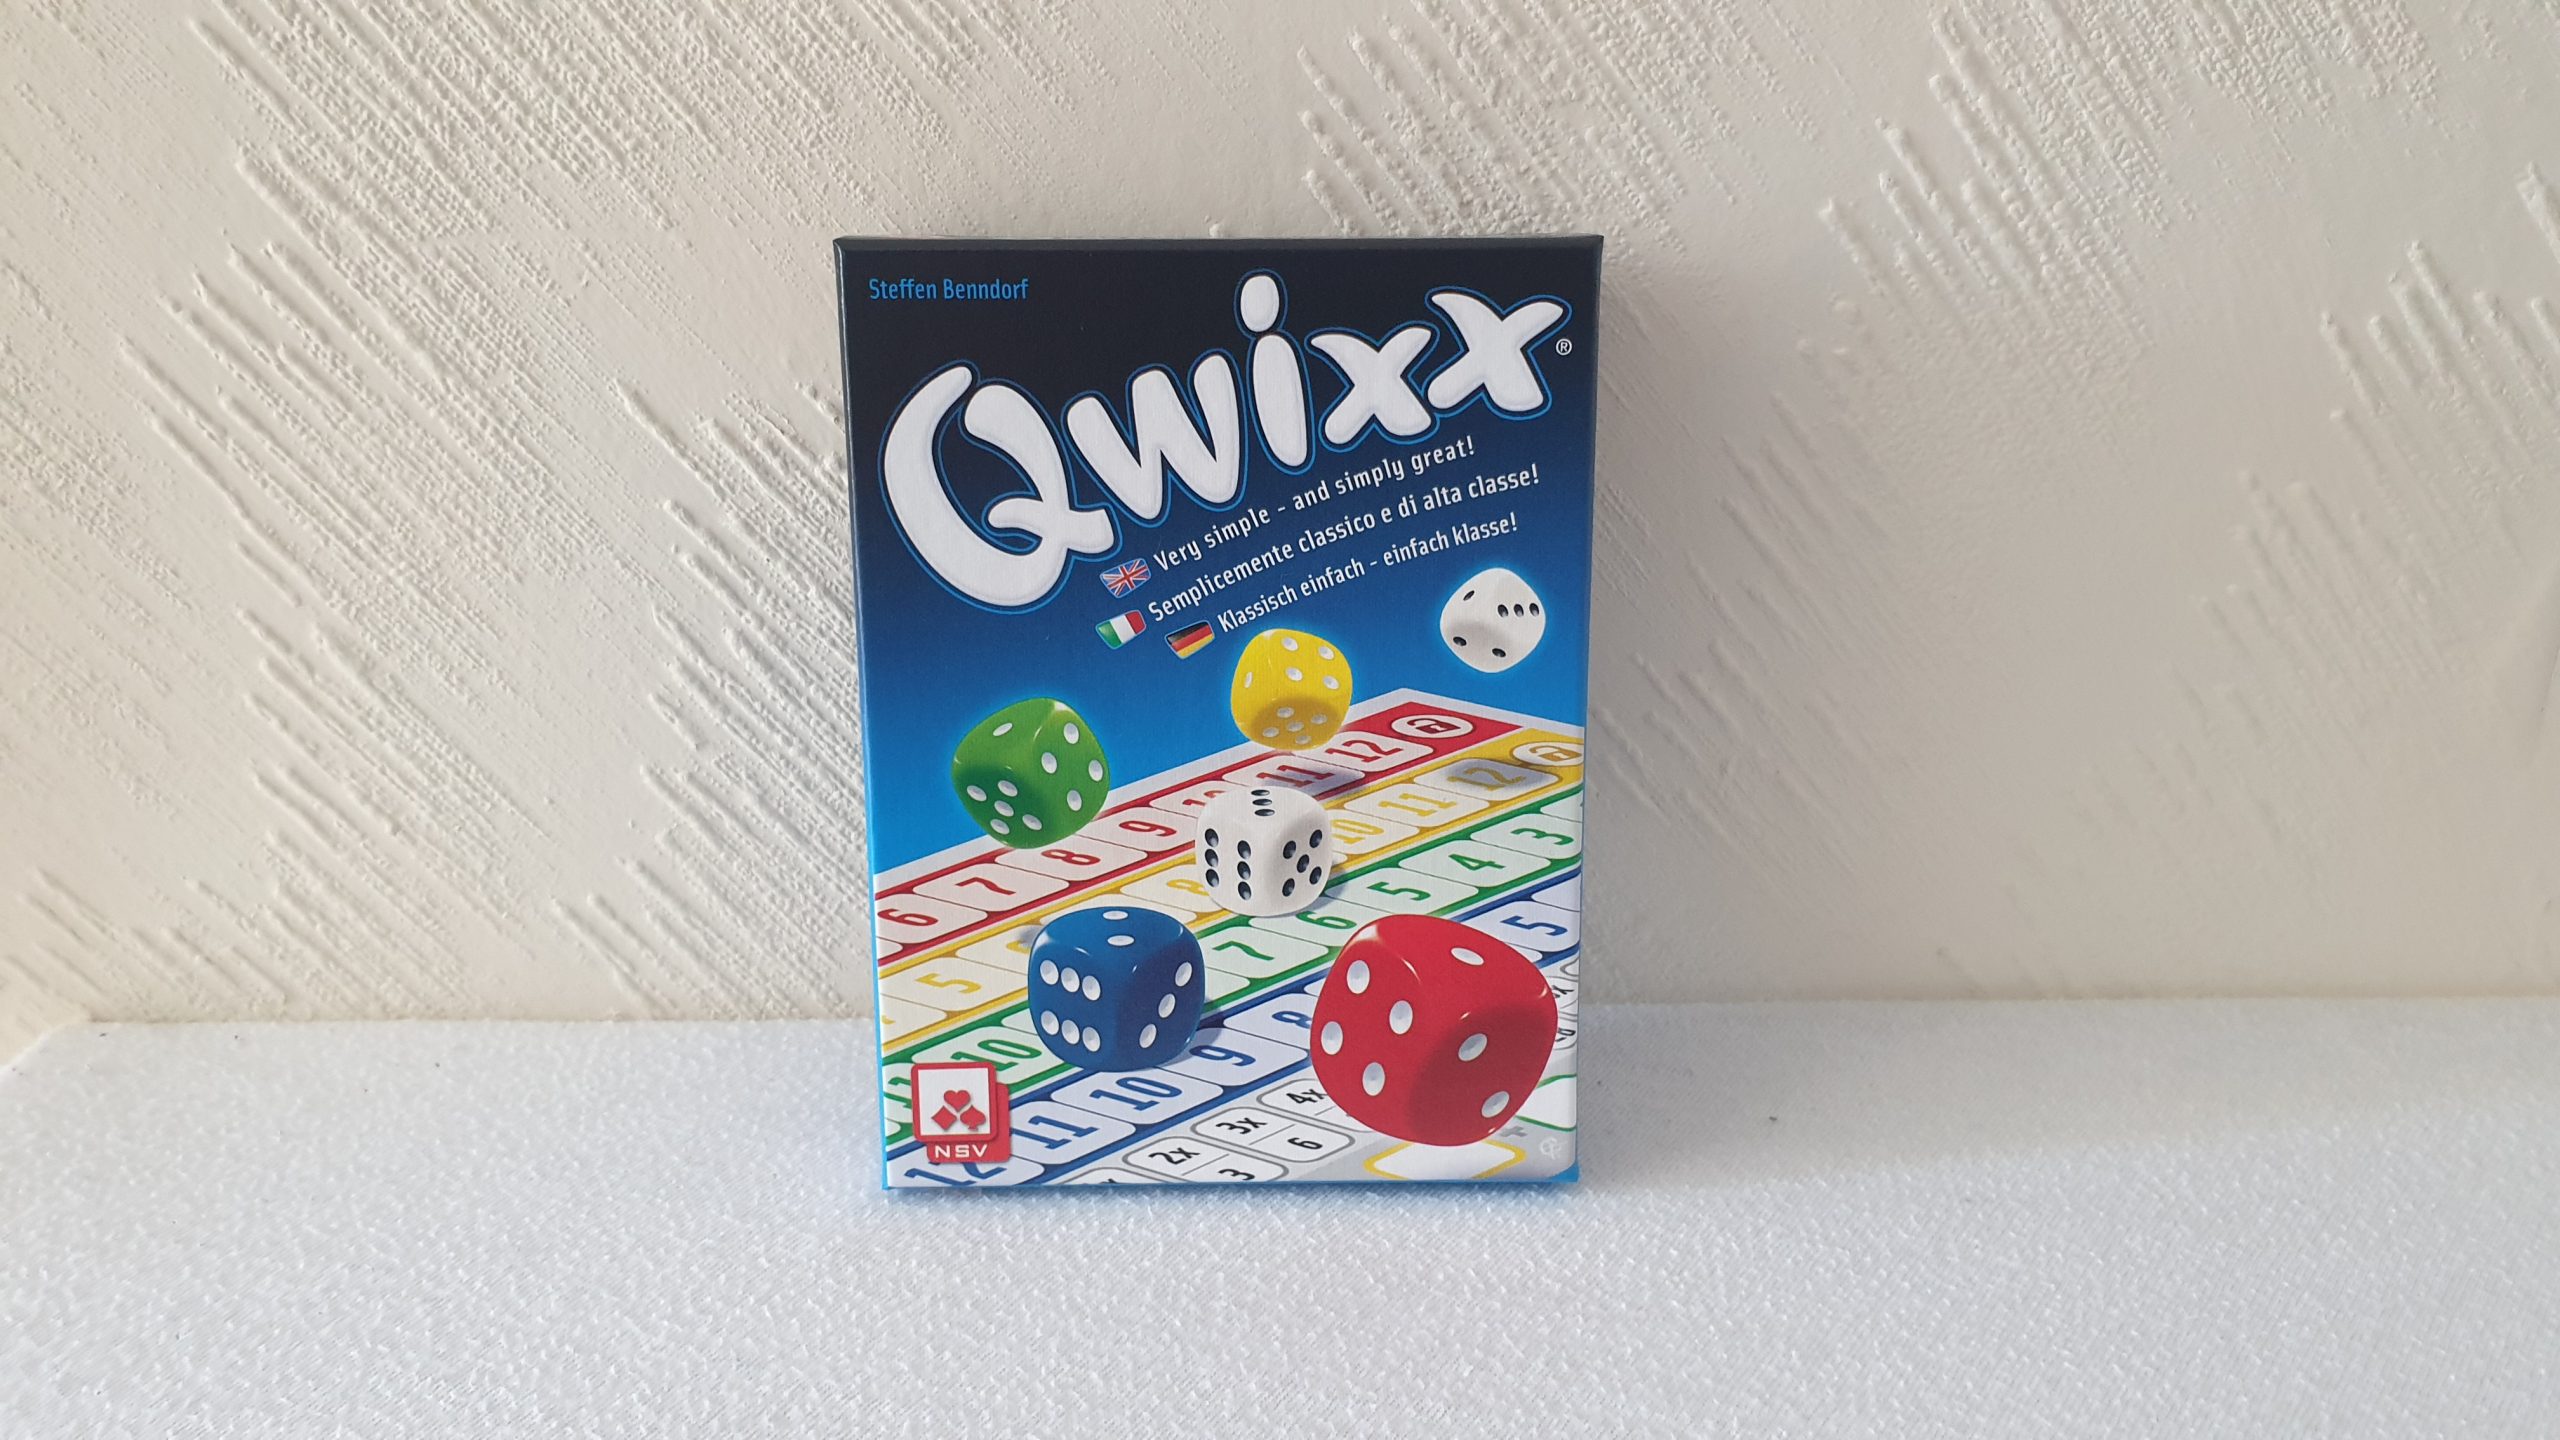 Qwixx Review – A Short, Simple Roll & Write